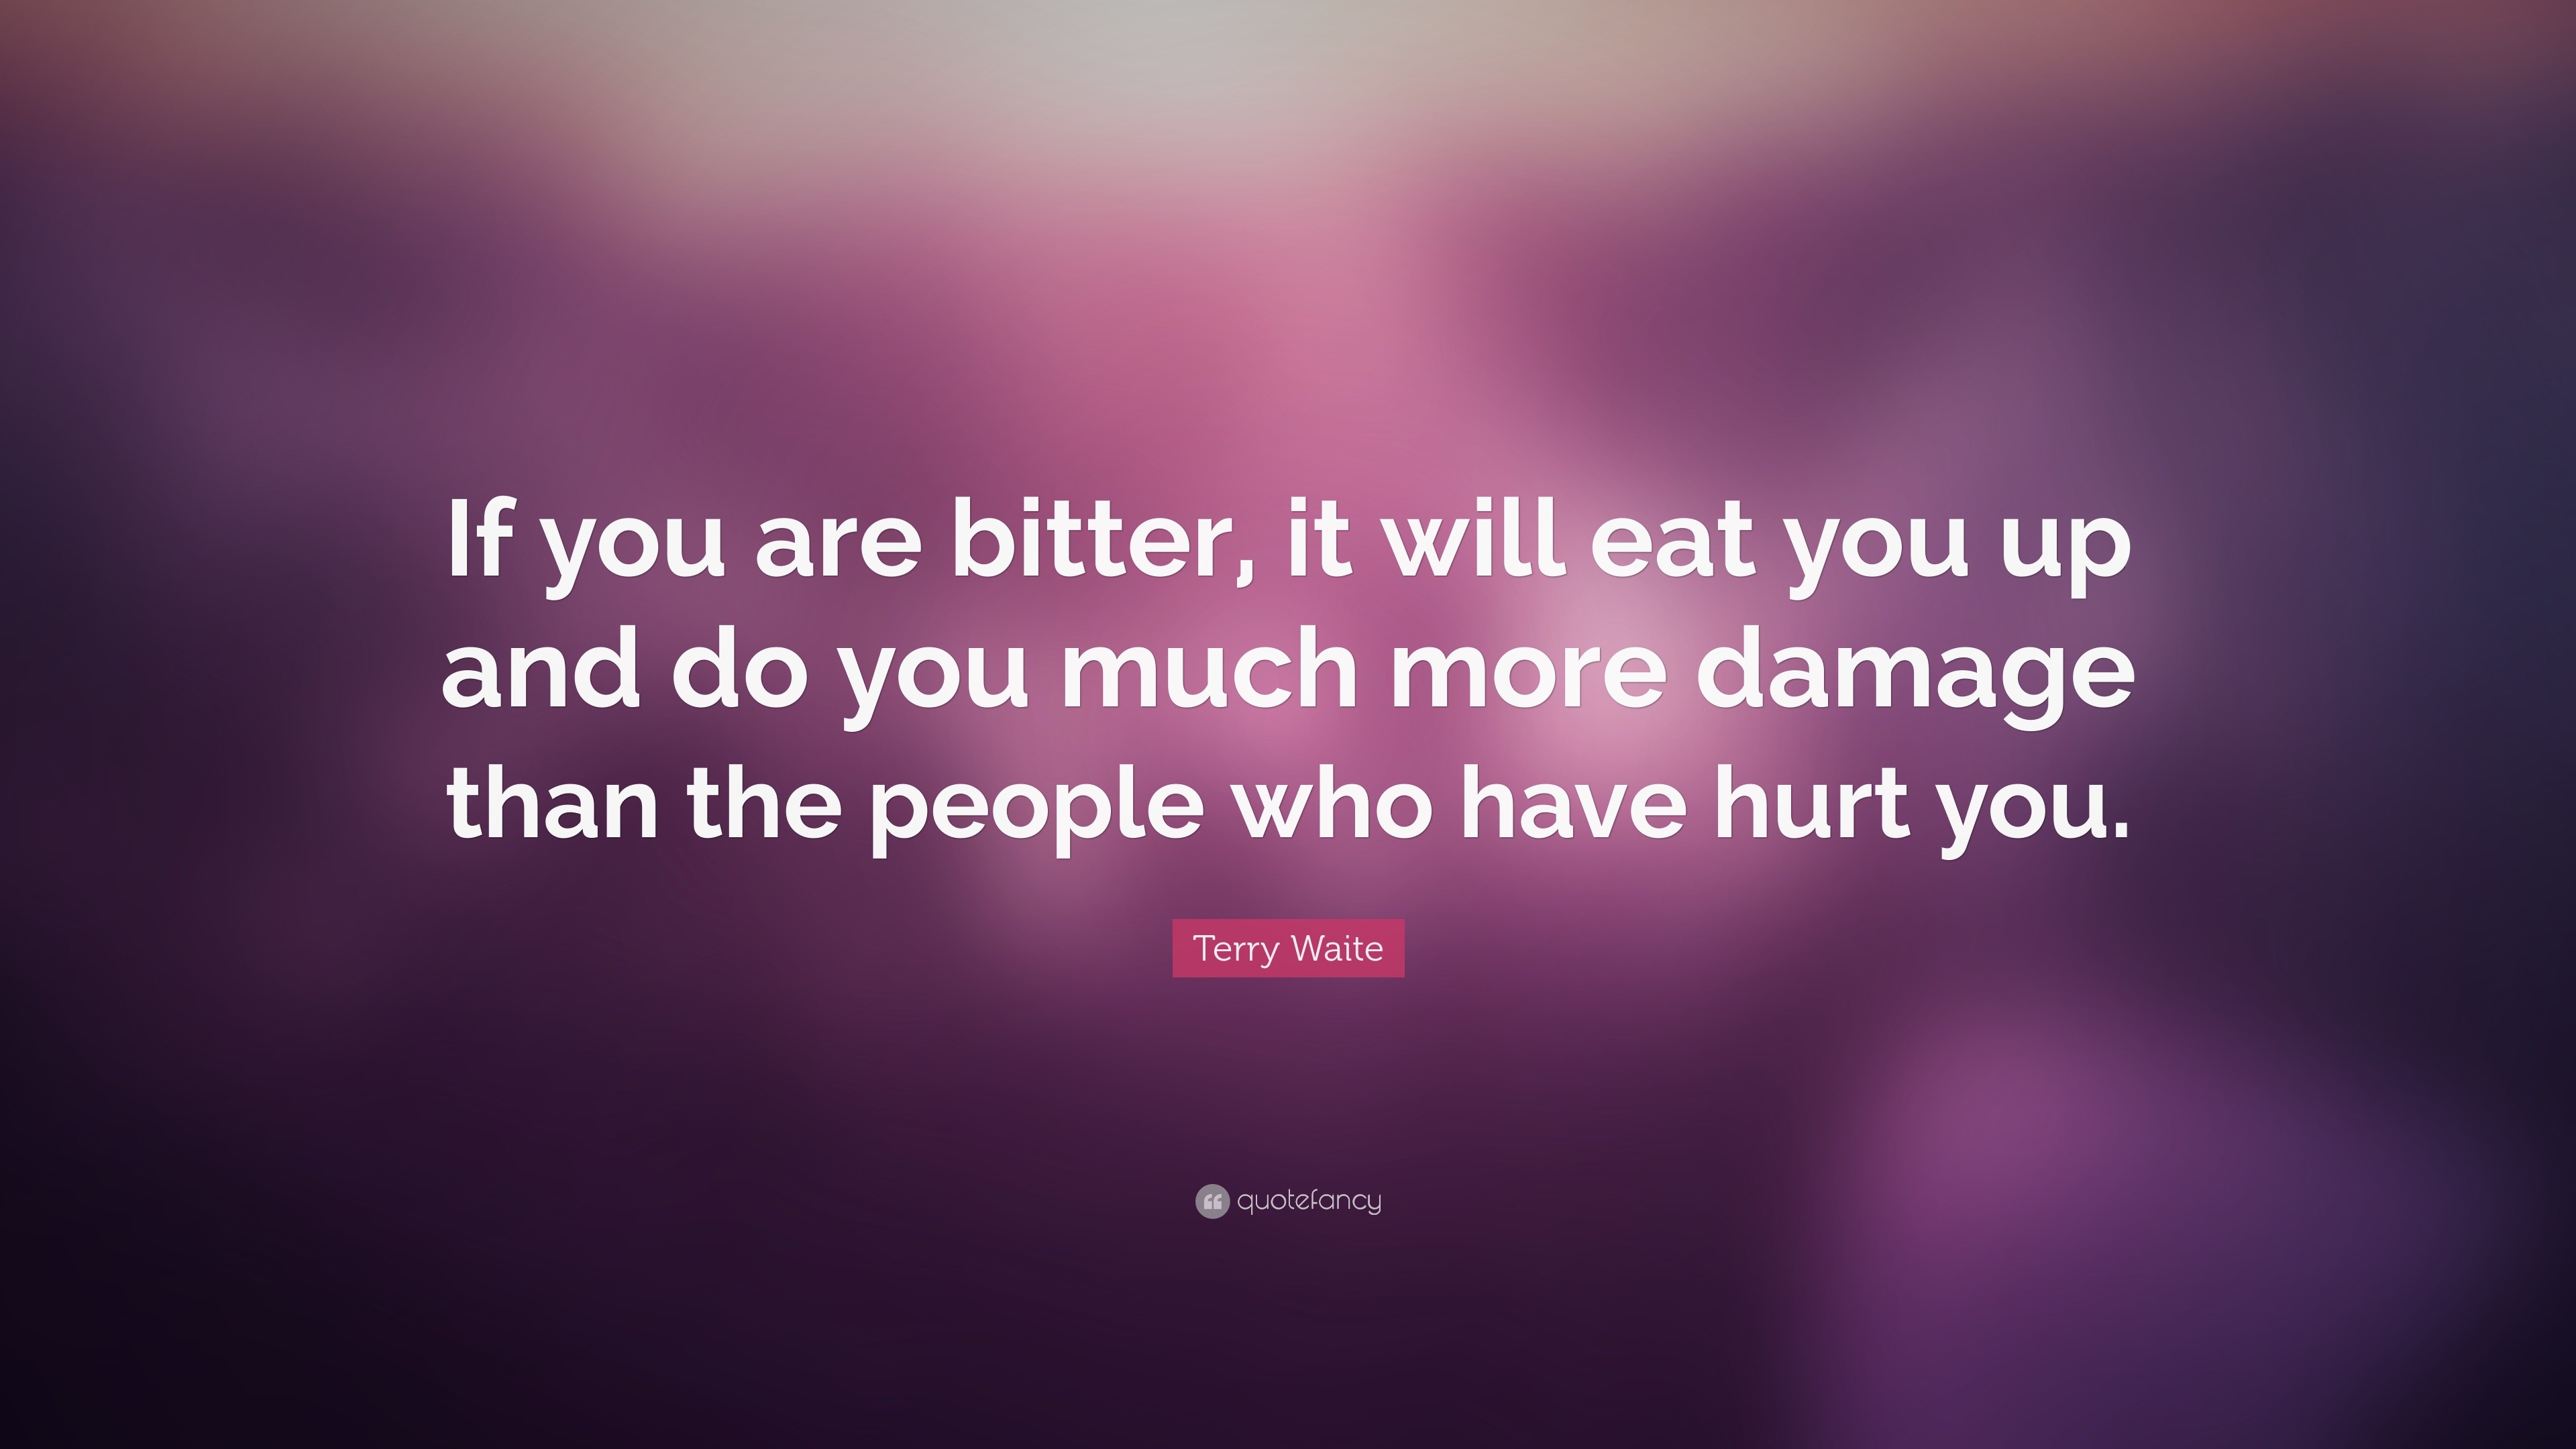 Terry Waite Quote: “If you are bitter, it will eat you up and do you ...